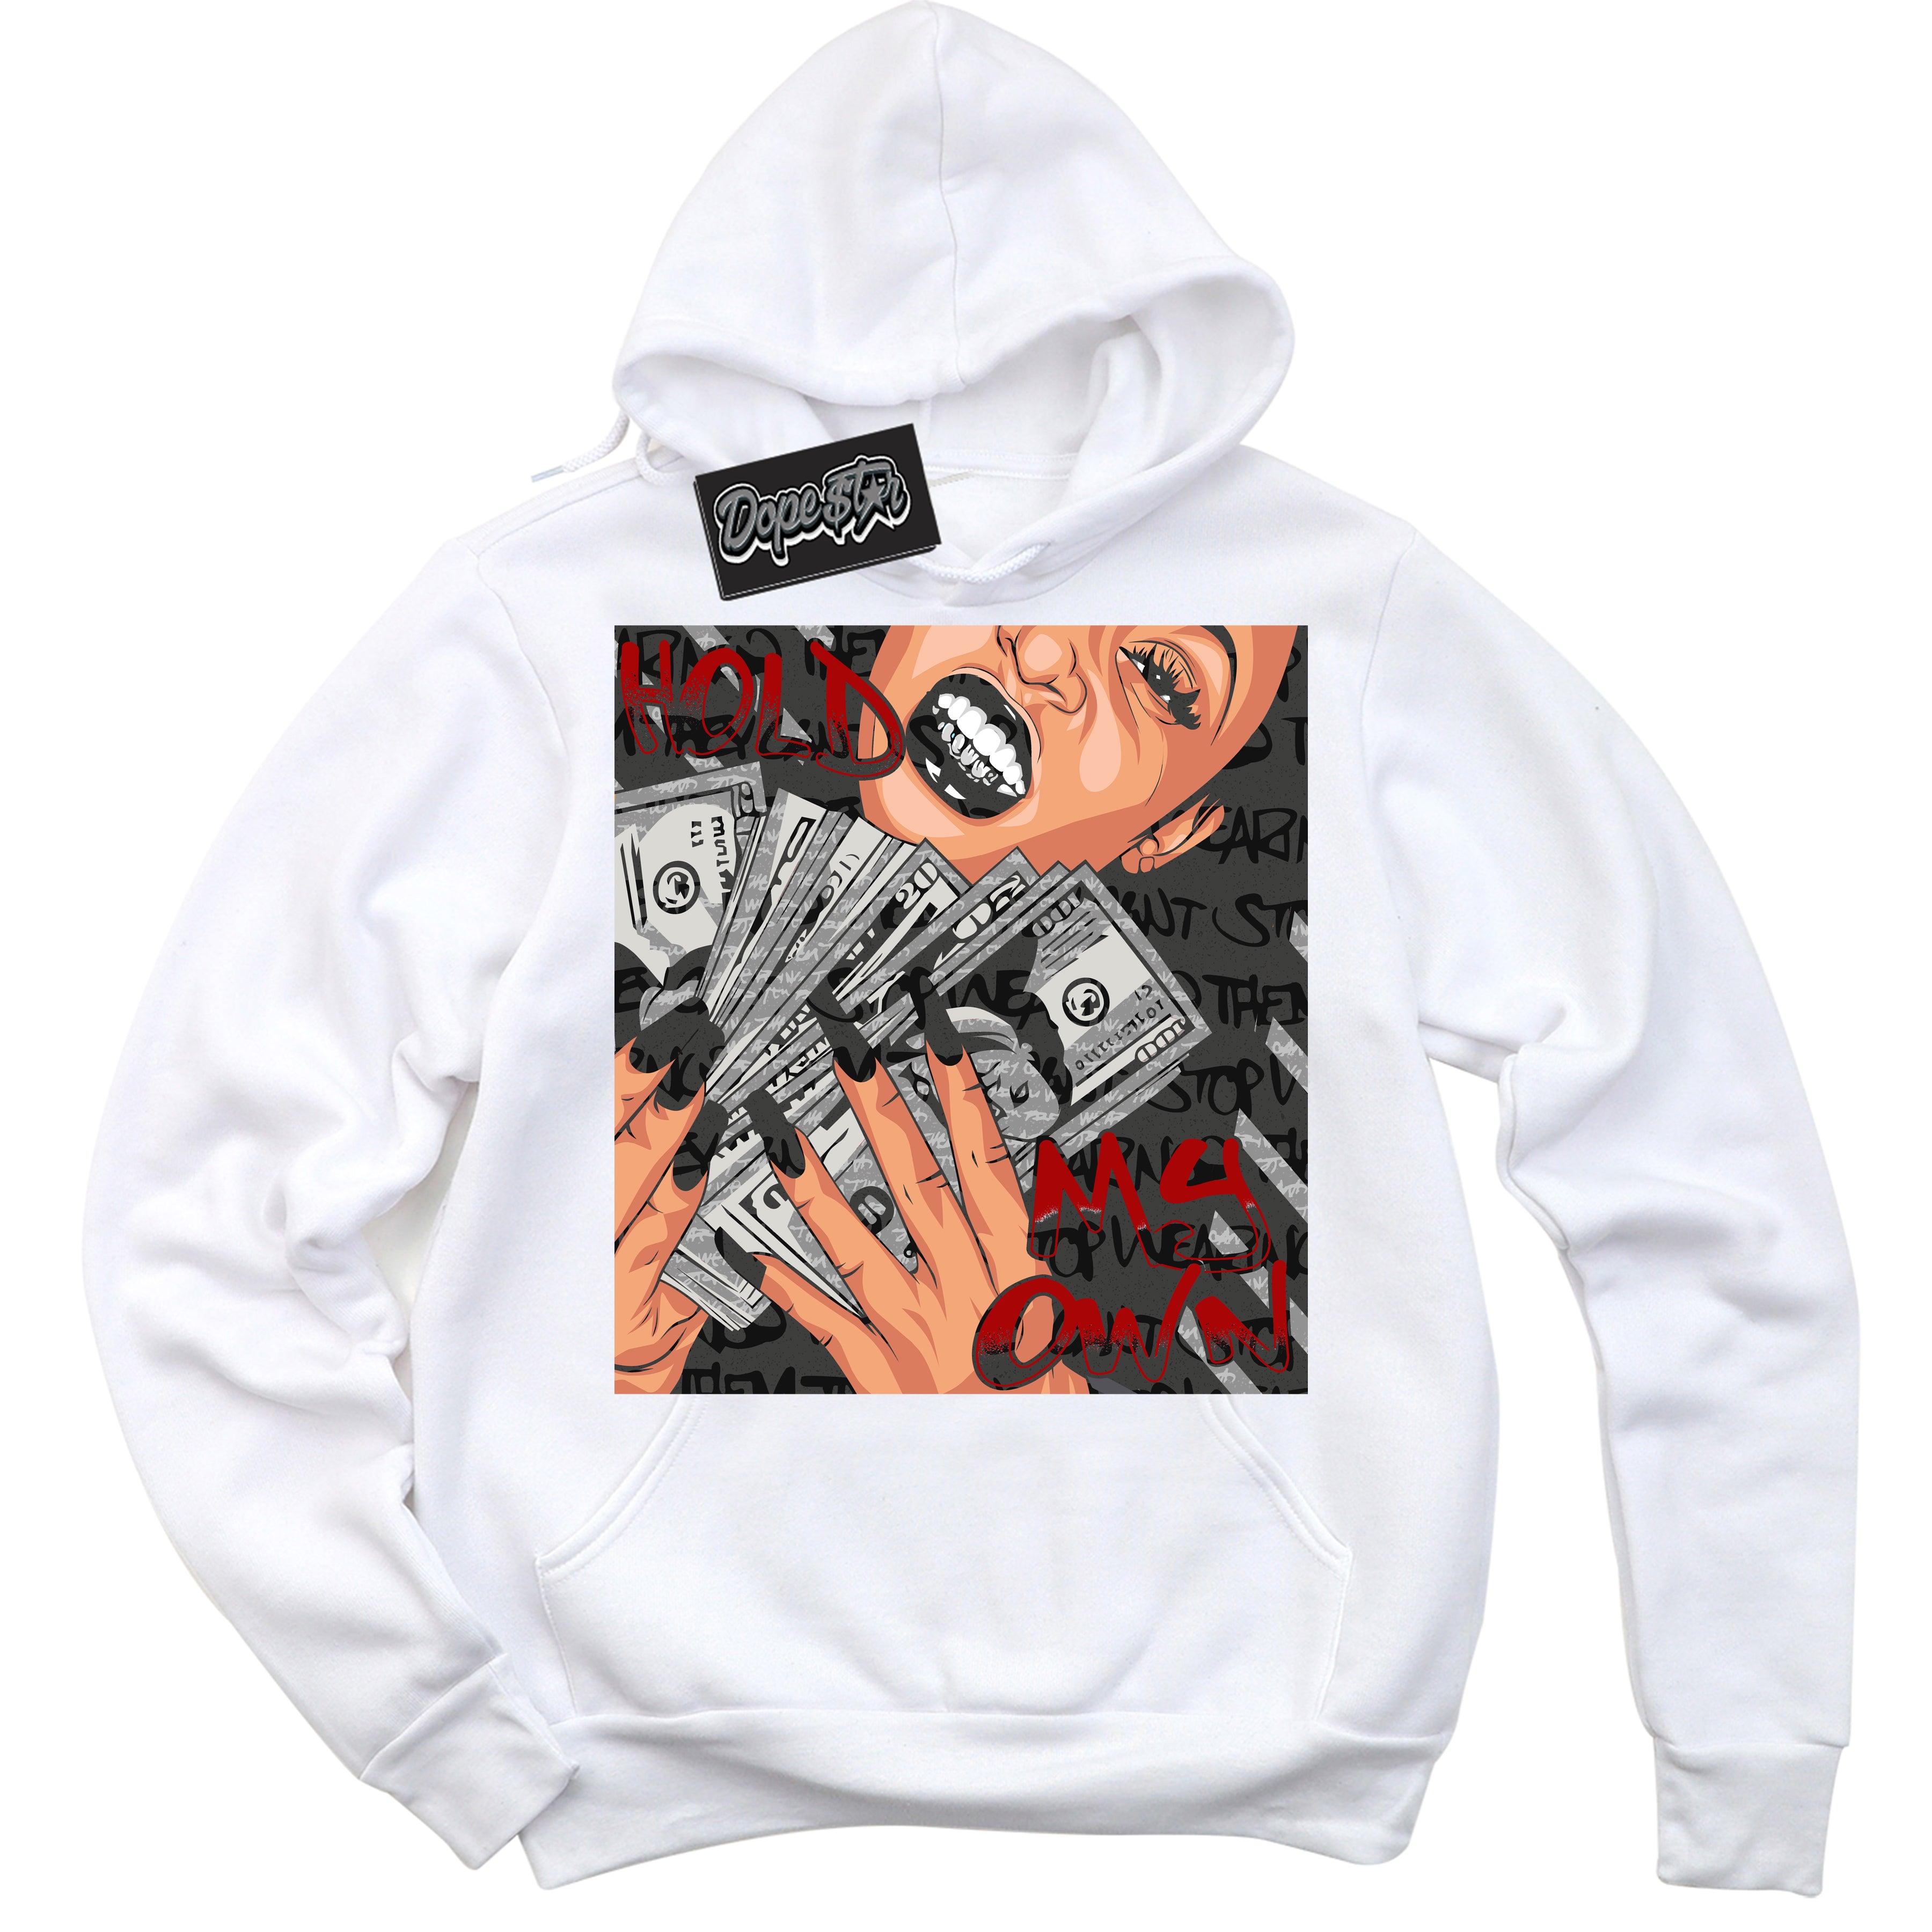 Cool White Hoodie with “ Hold My Own ”  design that Perfectly Matches Rebellionaire 1s Sneakers.